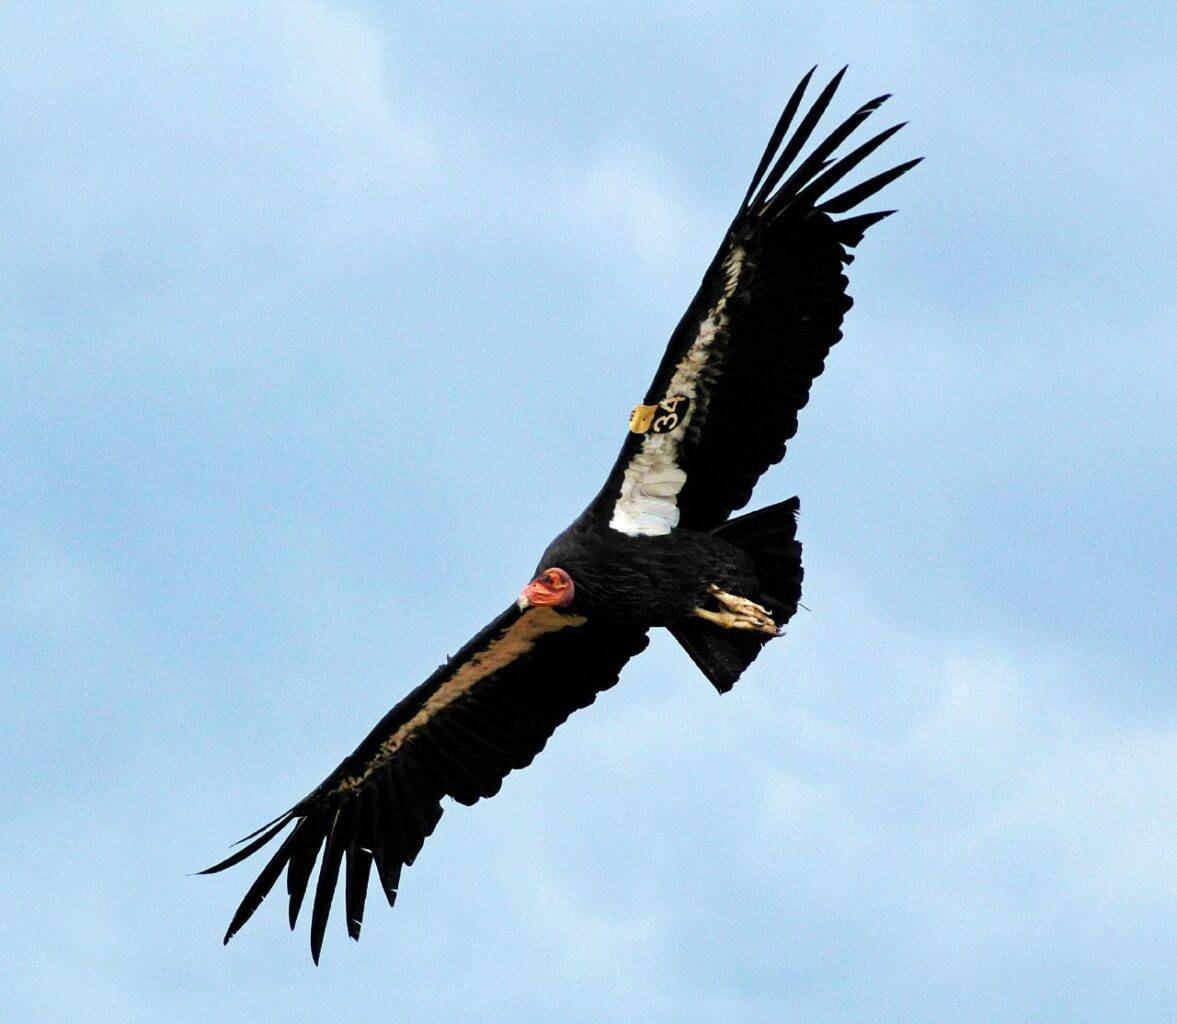 <p>This article discusses 20 different endangered species in America. Each species has an important role in the ecosystem and their conservation is of utmost importance to maintain ecological balance. </p> <p>The magnificent California condor has the largest wingspan of any North American Bird, reaching up to 9.8 feet. Unfortunately, this species is critically endangered, and conservation efforts are working hard to bring them back from the brink of extinction. However, they can still be found in parts of California, Arizona, Utah, and Baja California in Mexico. </p>